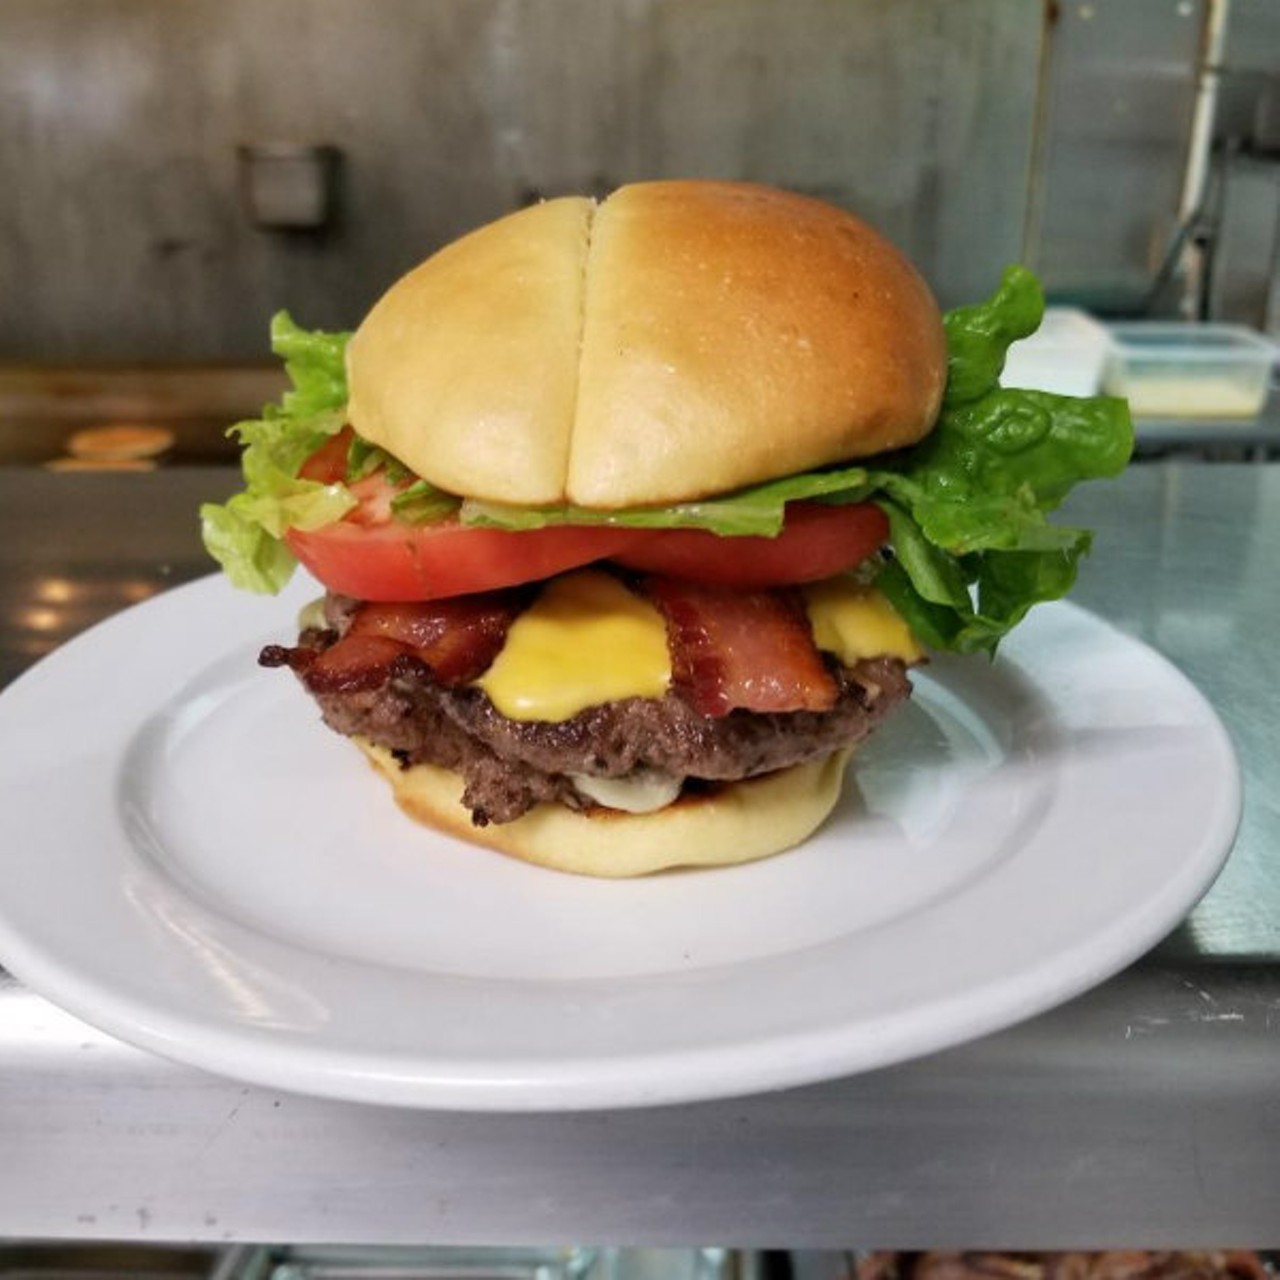 Riverside Diner
(8129 Reilly Avenue; 314-240-5566)
Double patty ground chuck burger with American and Swiss Cheese, topped with Hickory Smoked Bacon, all between a Fazio's Bun.